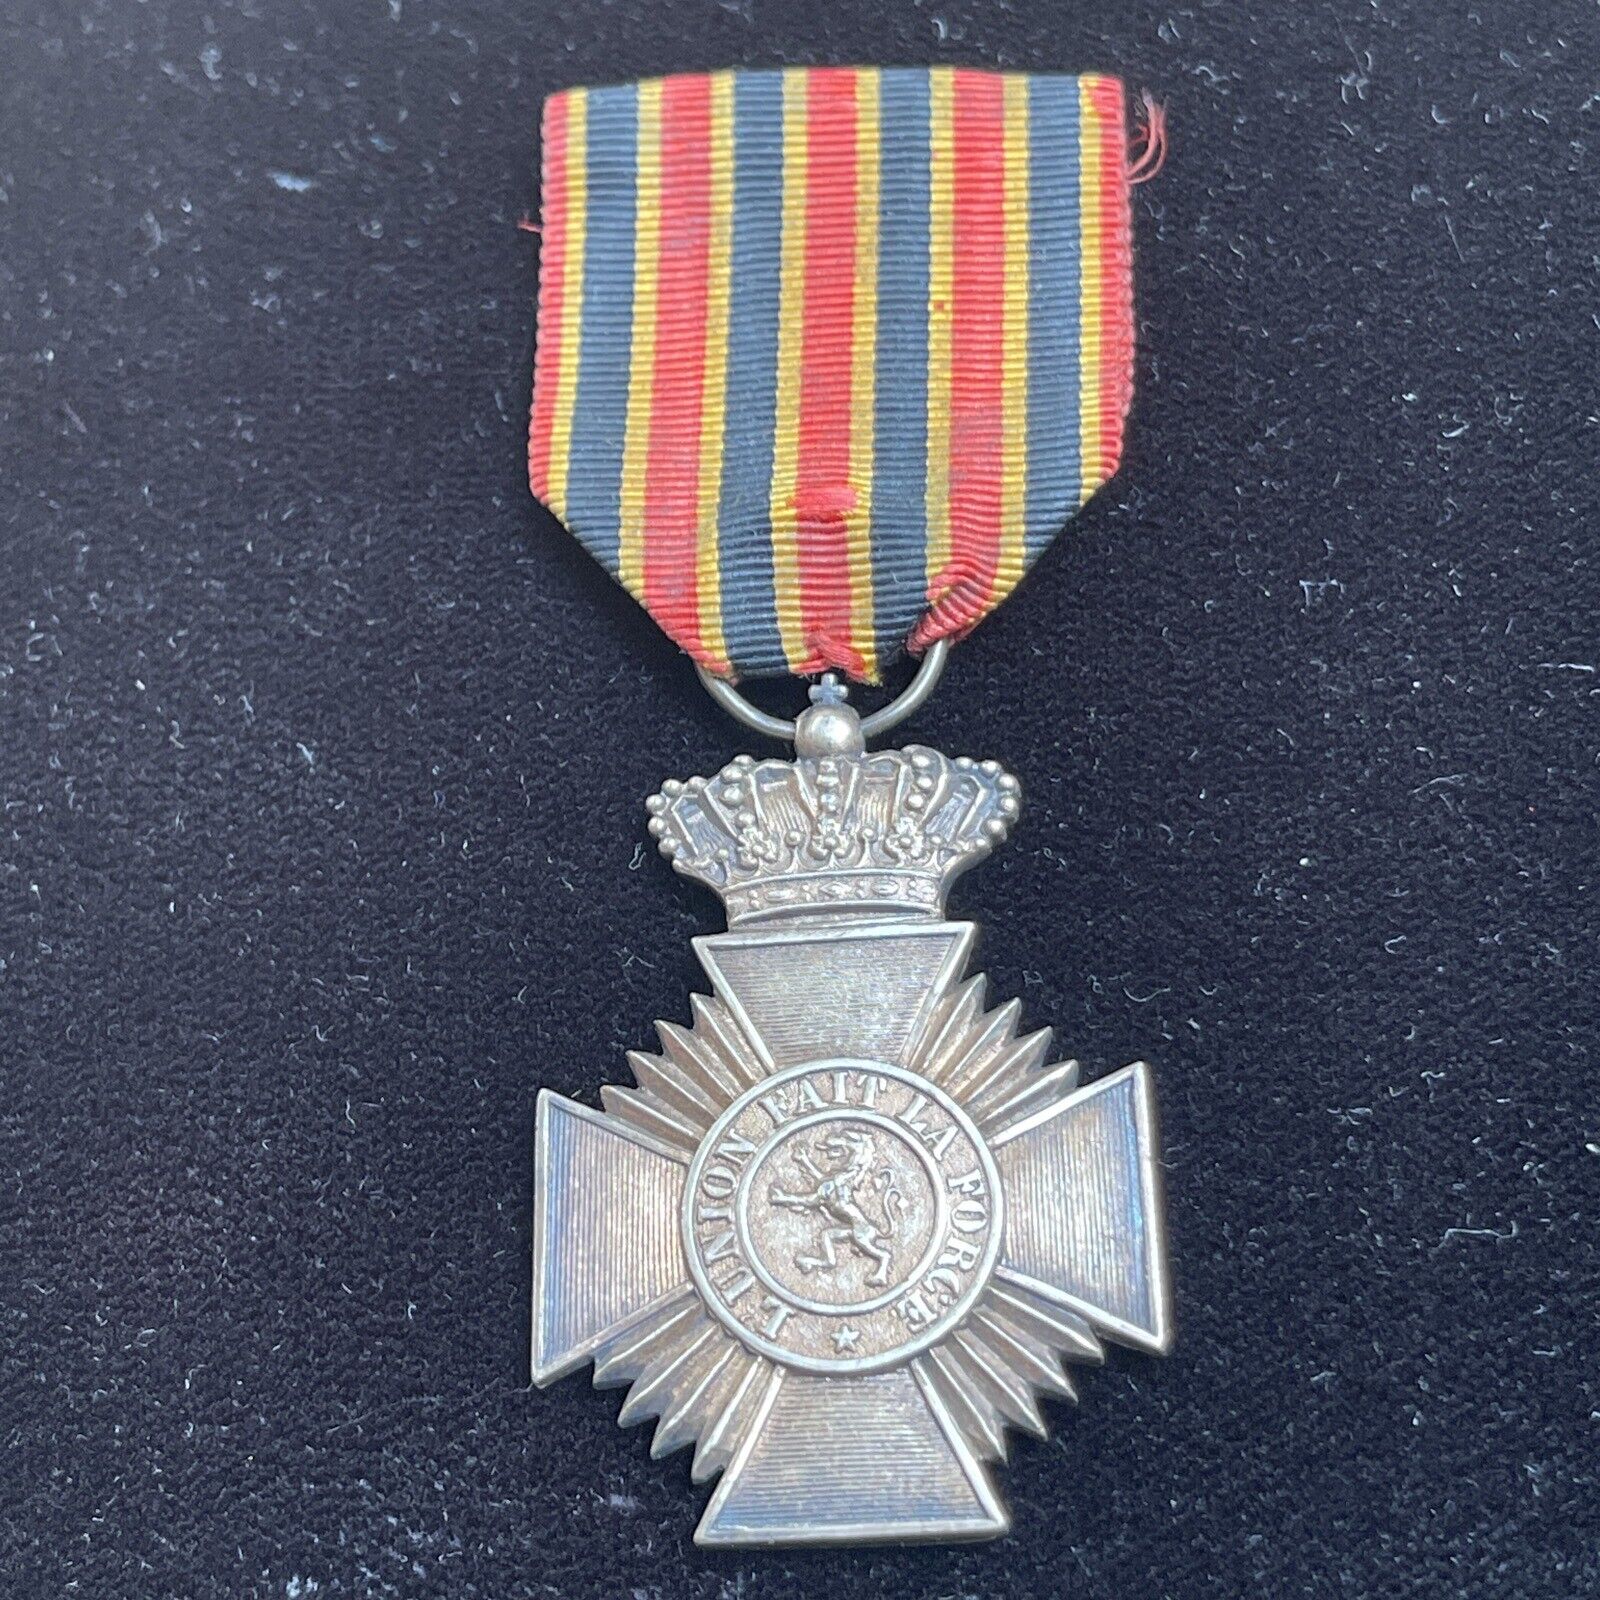 BELGIUM.MILITARY DECORATION,MEDAL FOR LONG SERVICE TYPE II,(1900-1919) 2nd CLASS